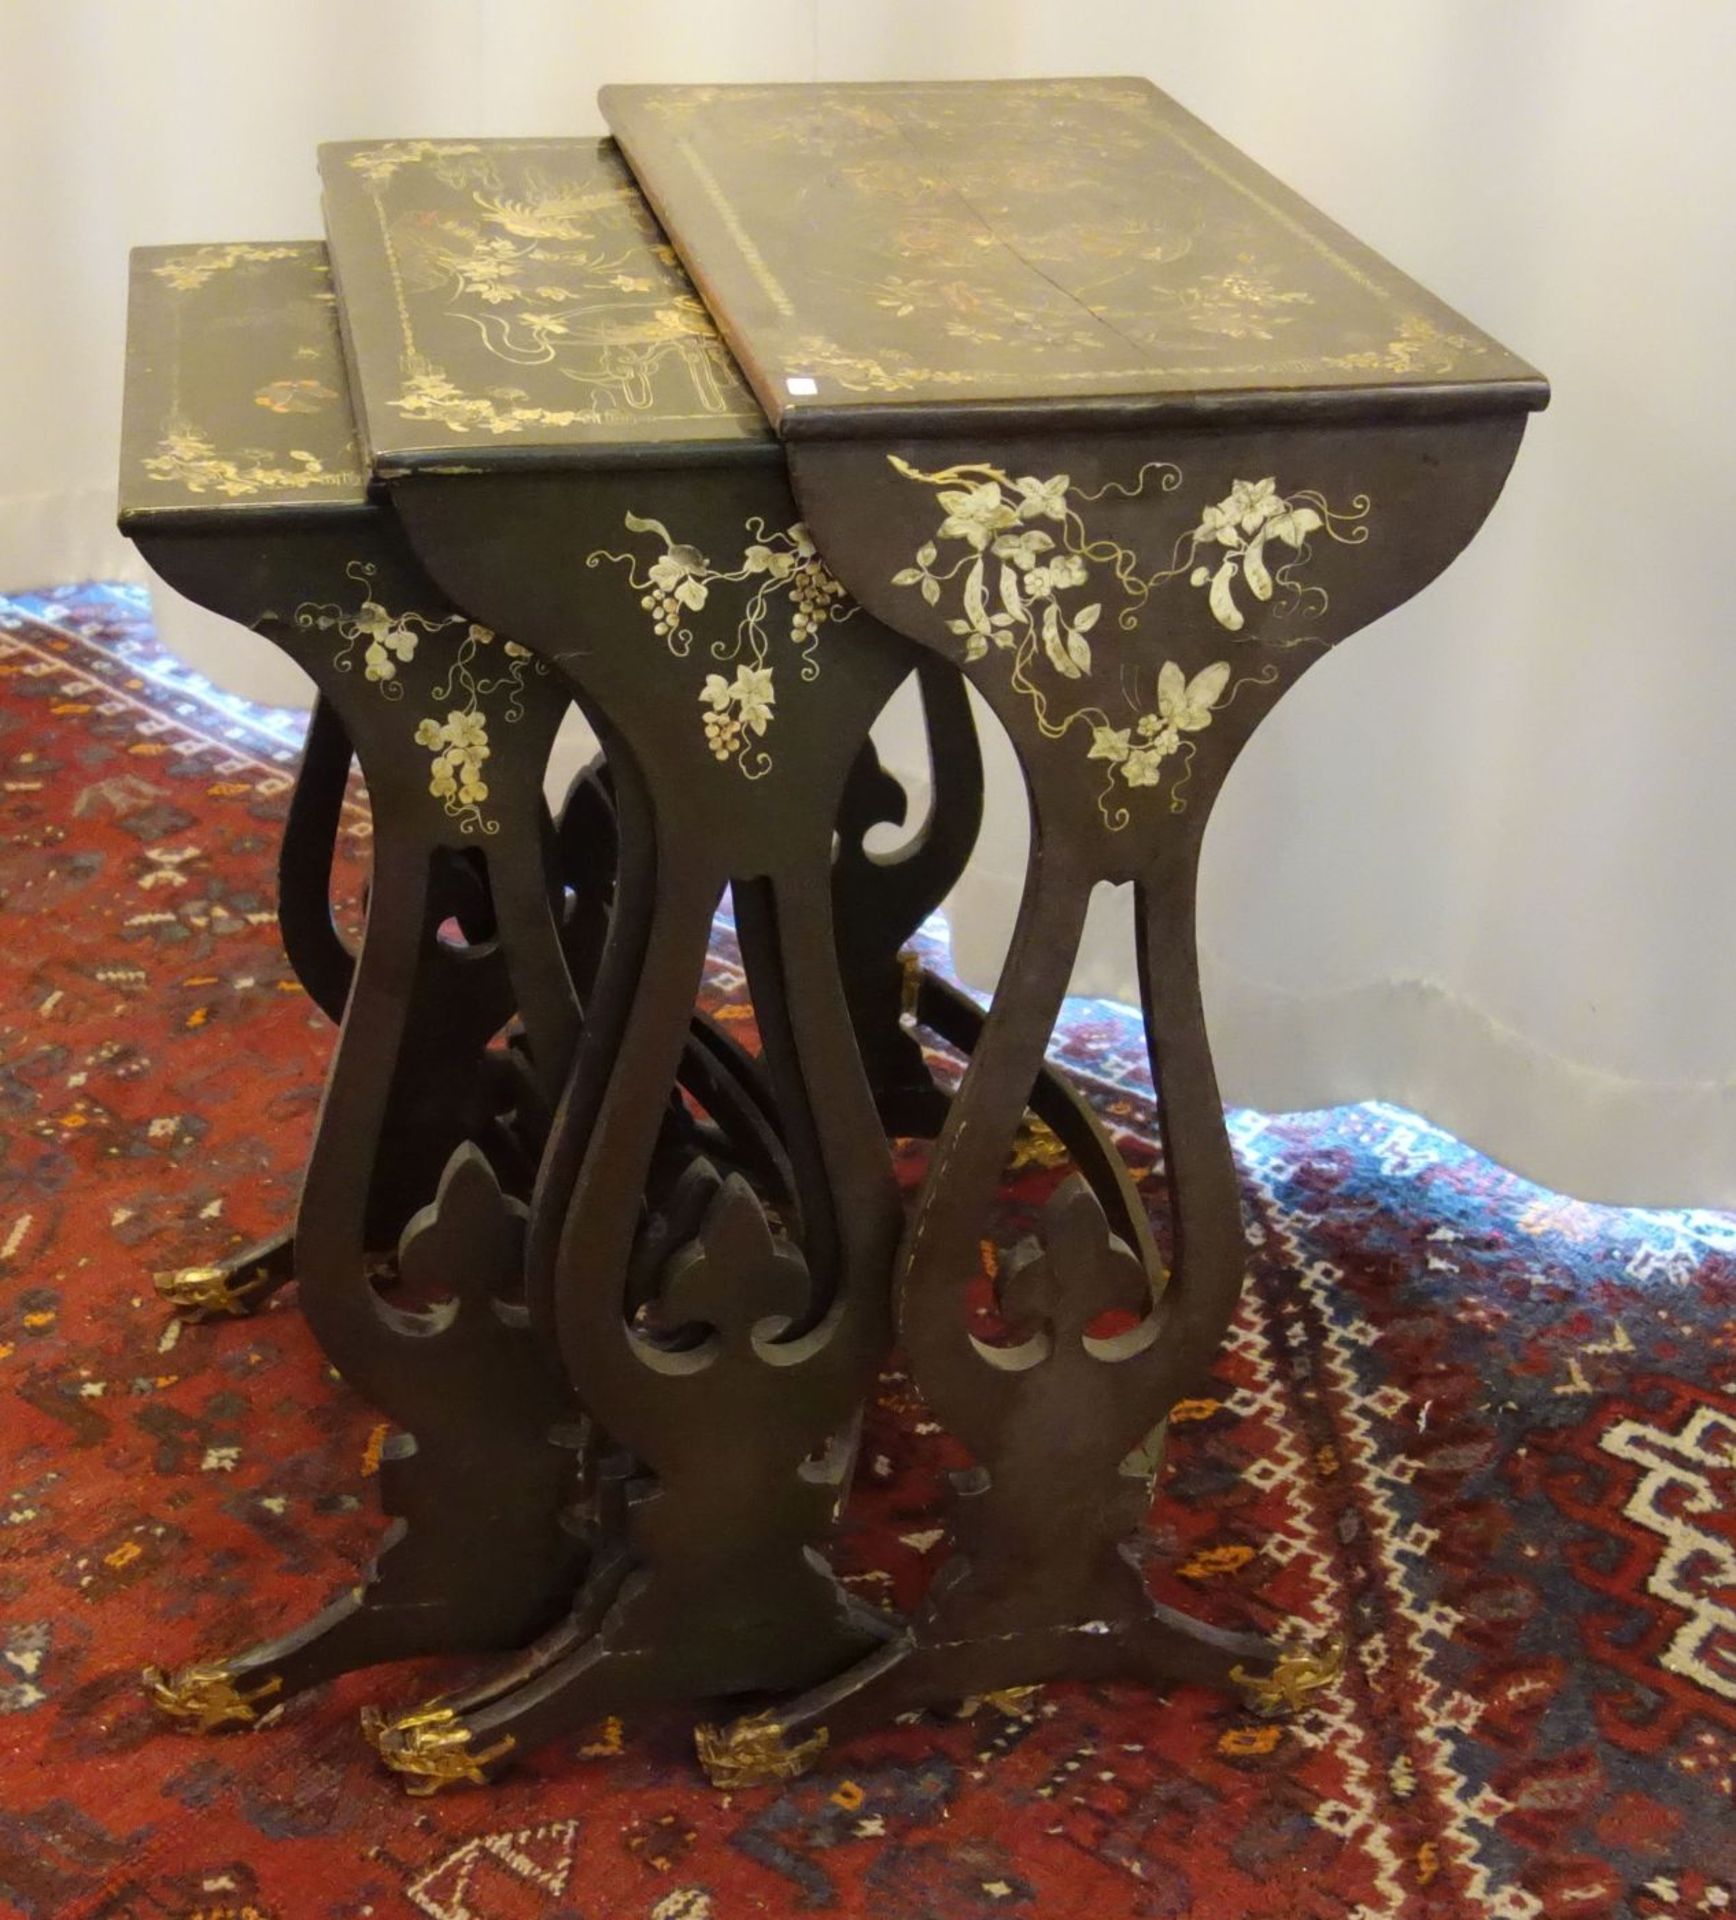 4 CHINOISE SIDE TABLES - Image 2 of 5